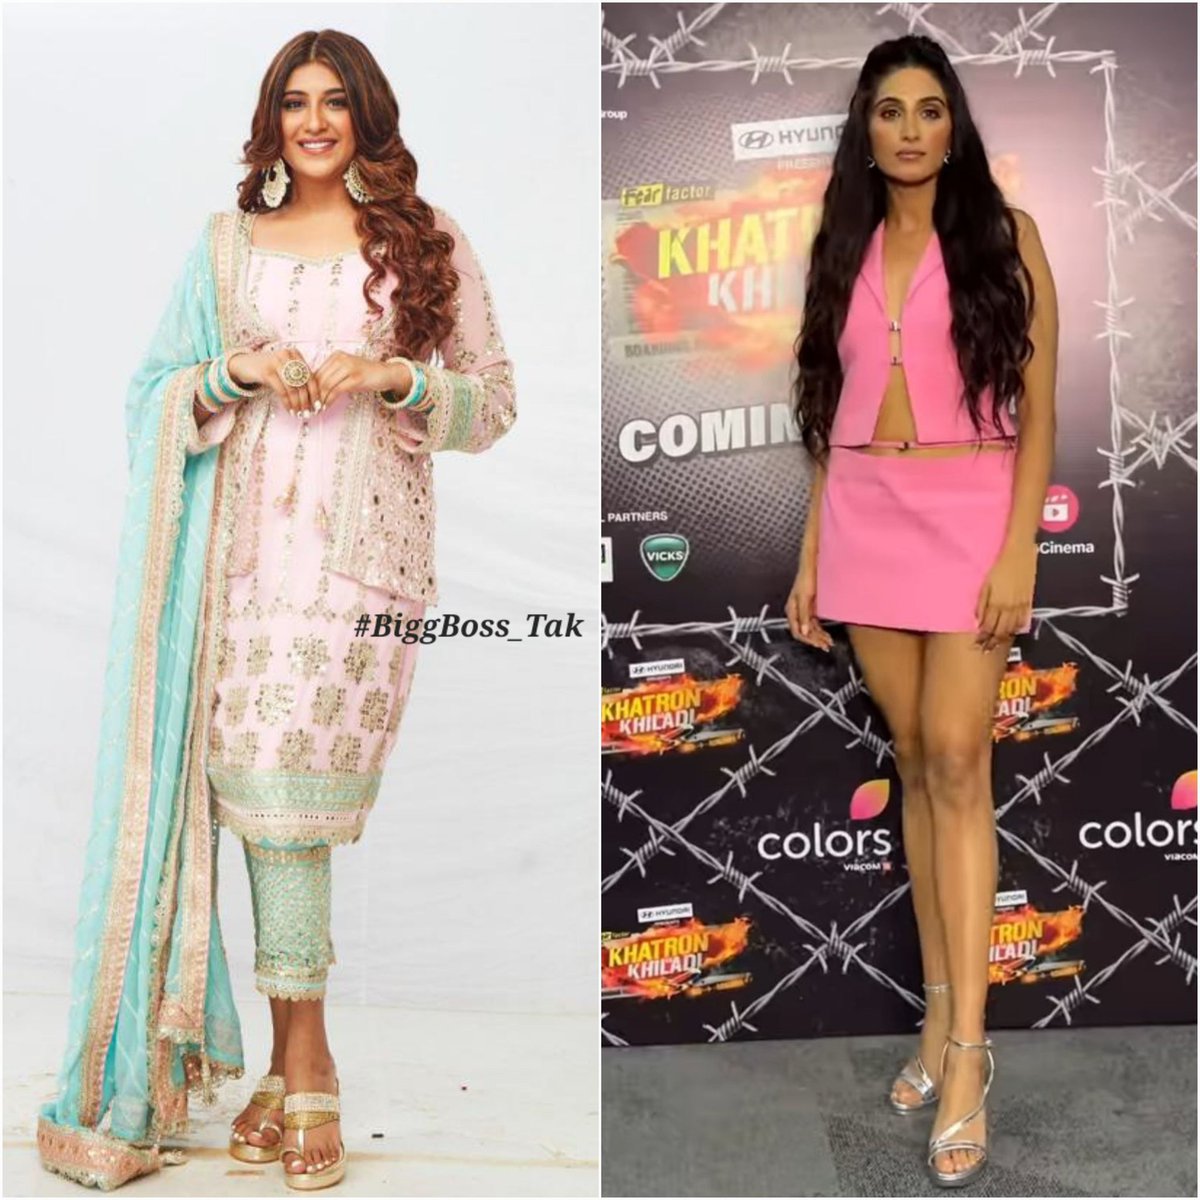 #NimritKaurAhluwalia stuns everyone with her transformation. Your views?